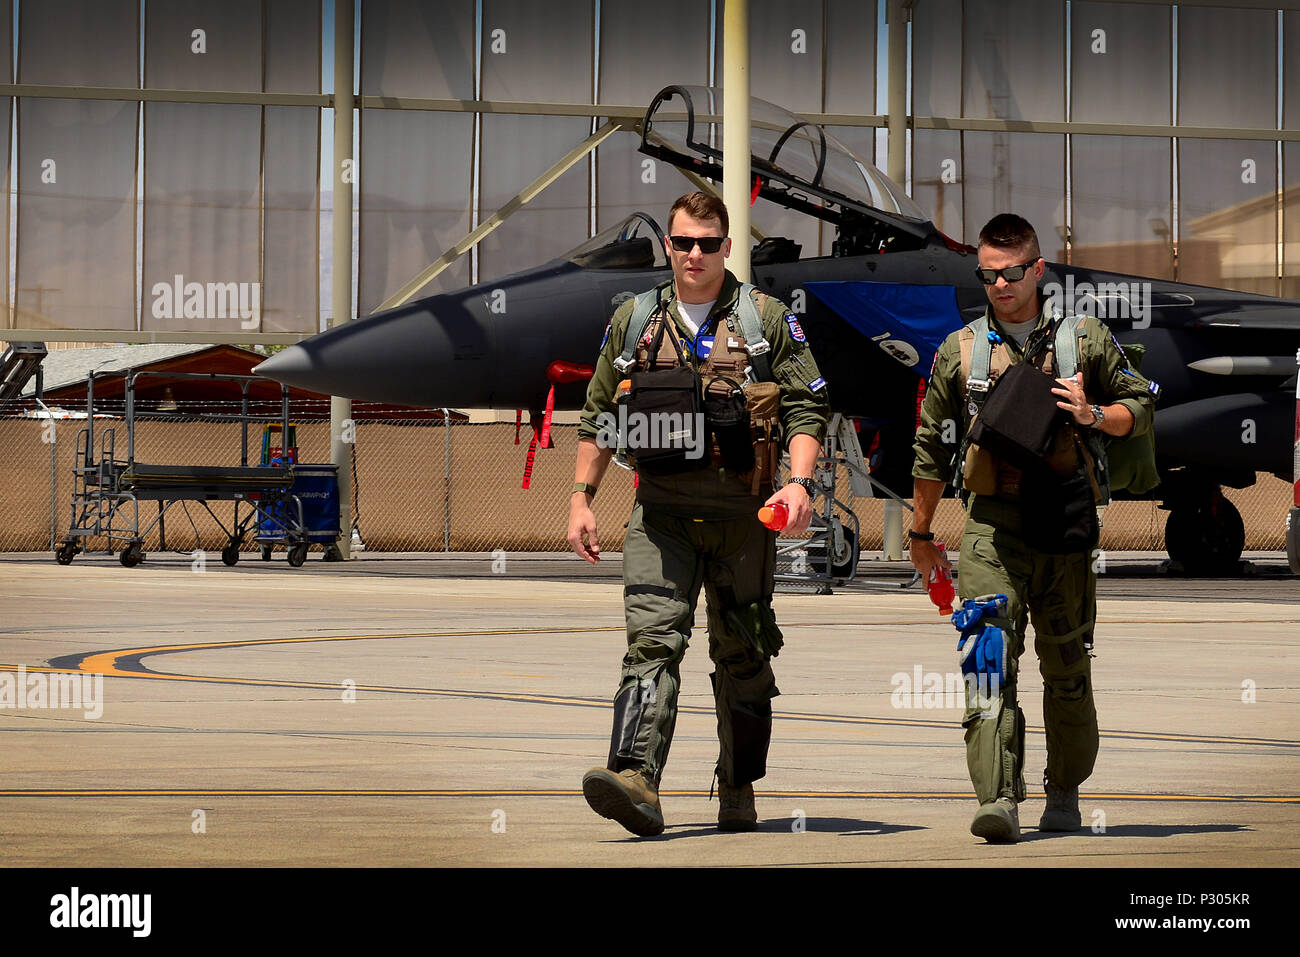 U.S. Air Force 1st Lieutenant Drew Lyons, 492nd Fighter Squadron, F-15E Strike Eagle pilot, and 1st Lieutenant J. Paul Reasner, 492nd FS, F-15E Strike Eagle weapon systems officer, step to their aircraft for a sortie in support of exercise Red Flag 16-4 at Nellis Air Force Base, Nev. Aug 17. Red Flag is the U.S. Air Force’s premier air-to-air combat training exercise and one of a series of advanced training programs that is administered by the U.S. Air Force Warfare Center and executed through the 414th Combat Training Squadron. (U.S. Air Force photo/ Tech. Sgt. Matthew Plew) Stock Photo